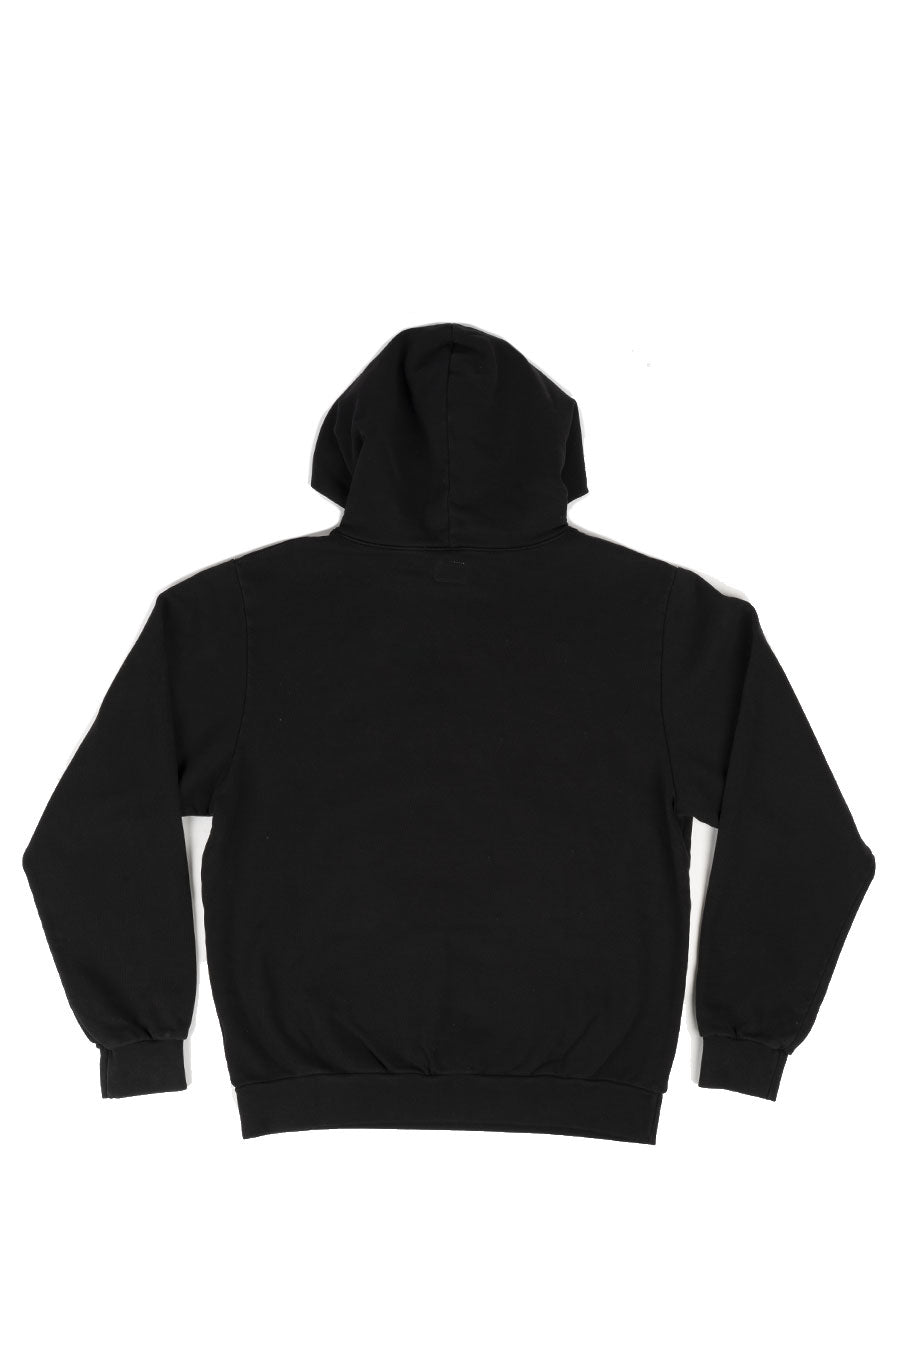 AFIELD OUT X MOUNT SUNNY MEDITATION HOODIE BLACK